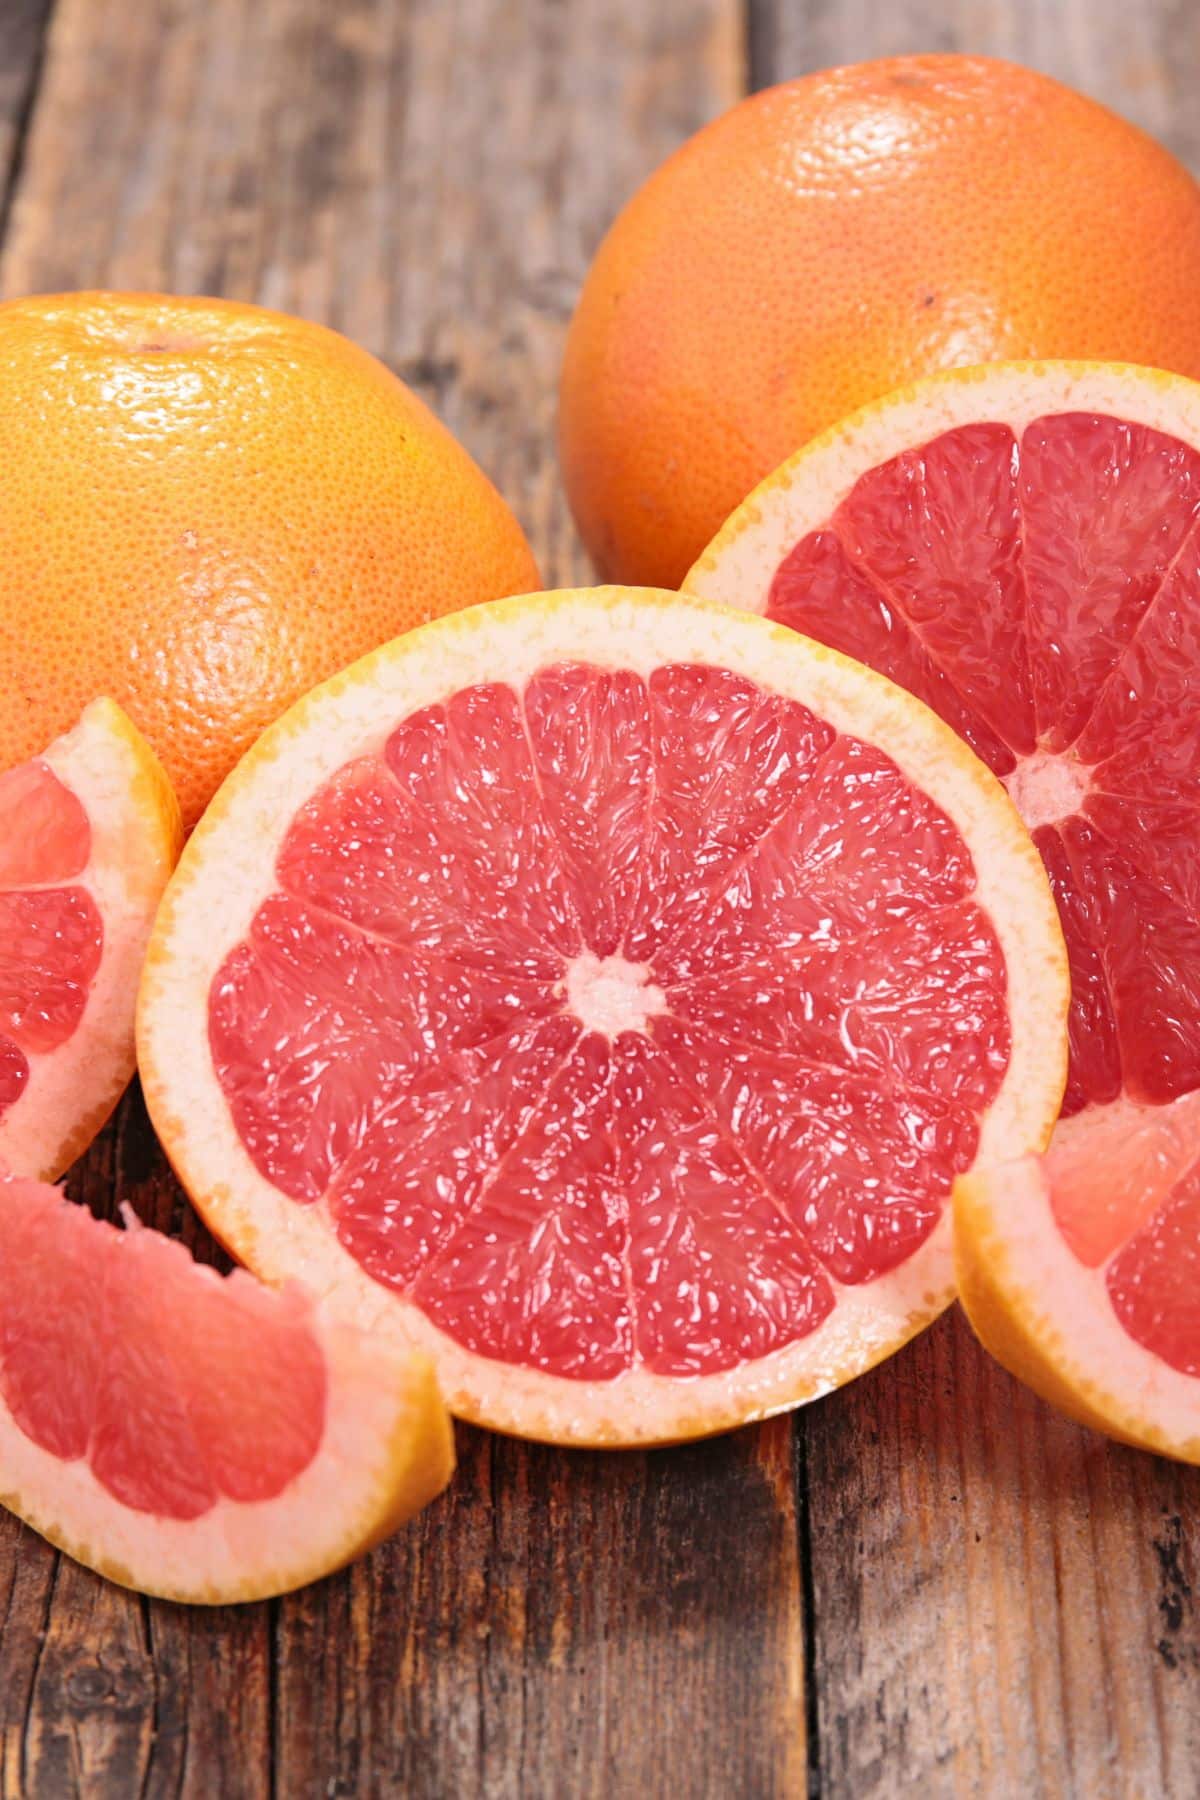 grapefruits on a wooden table.